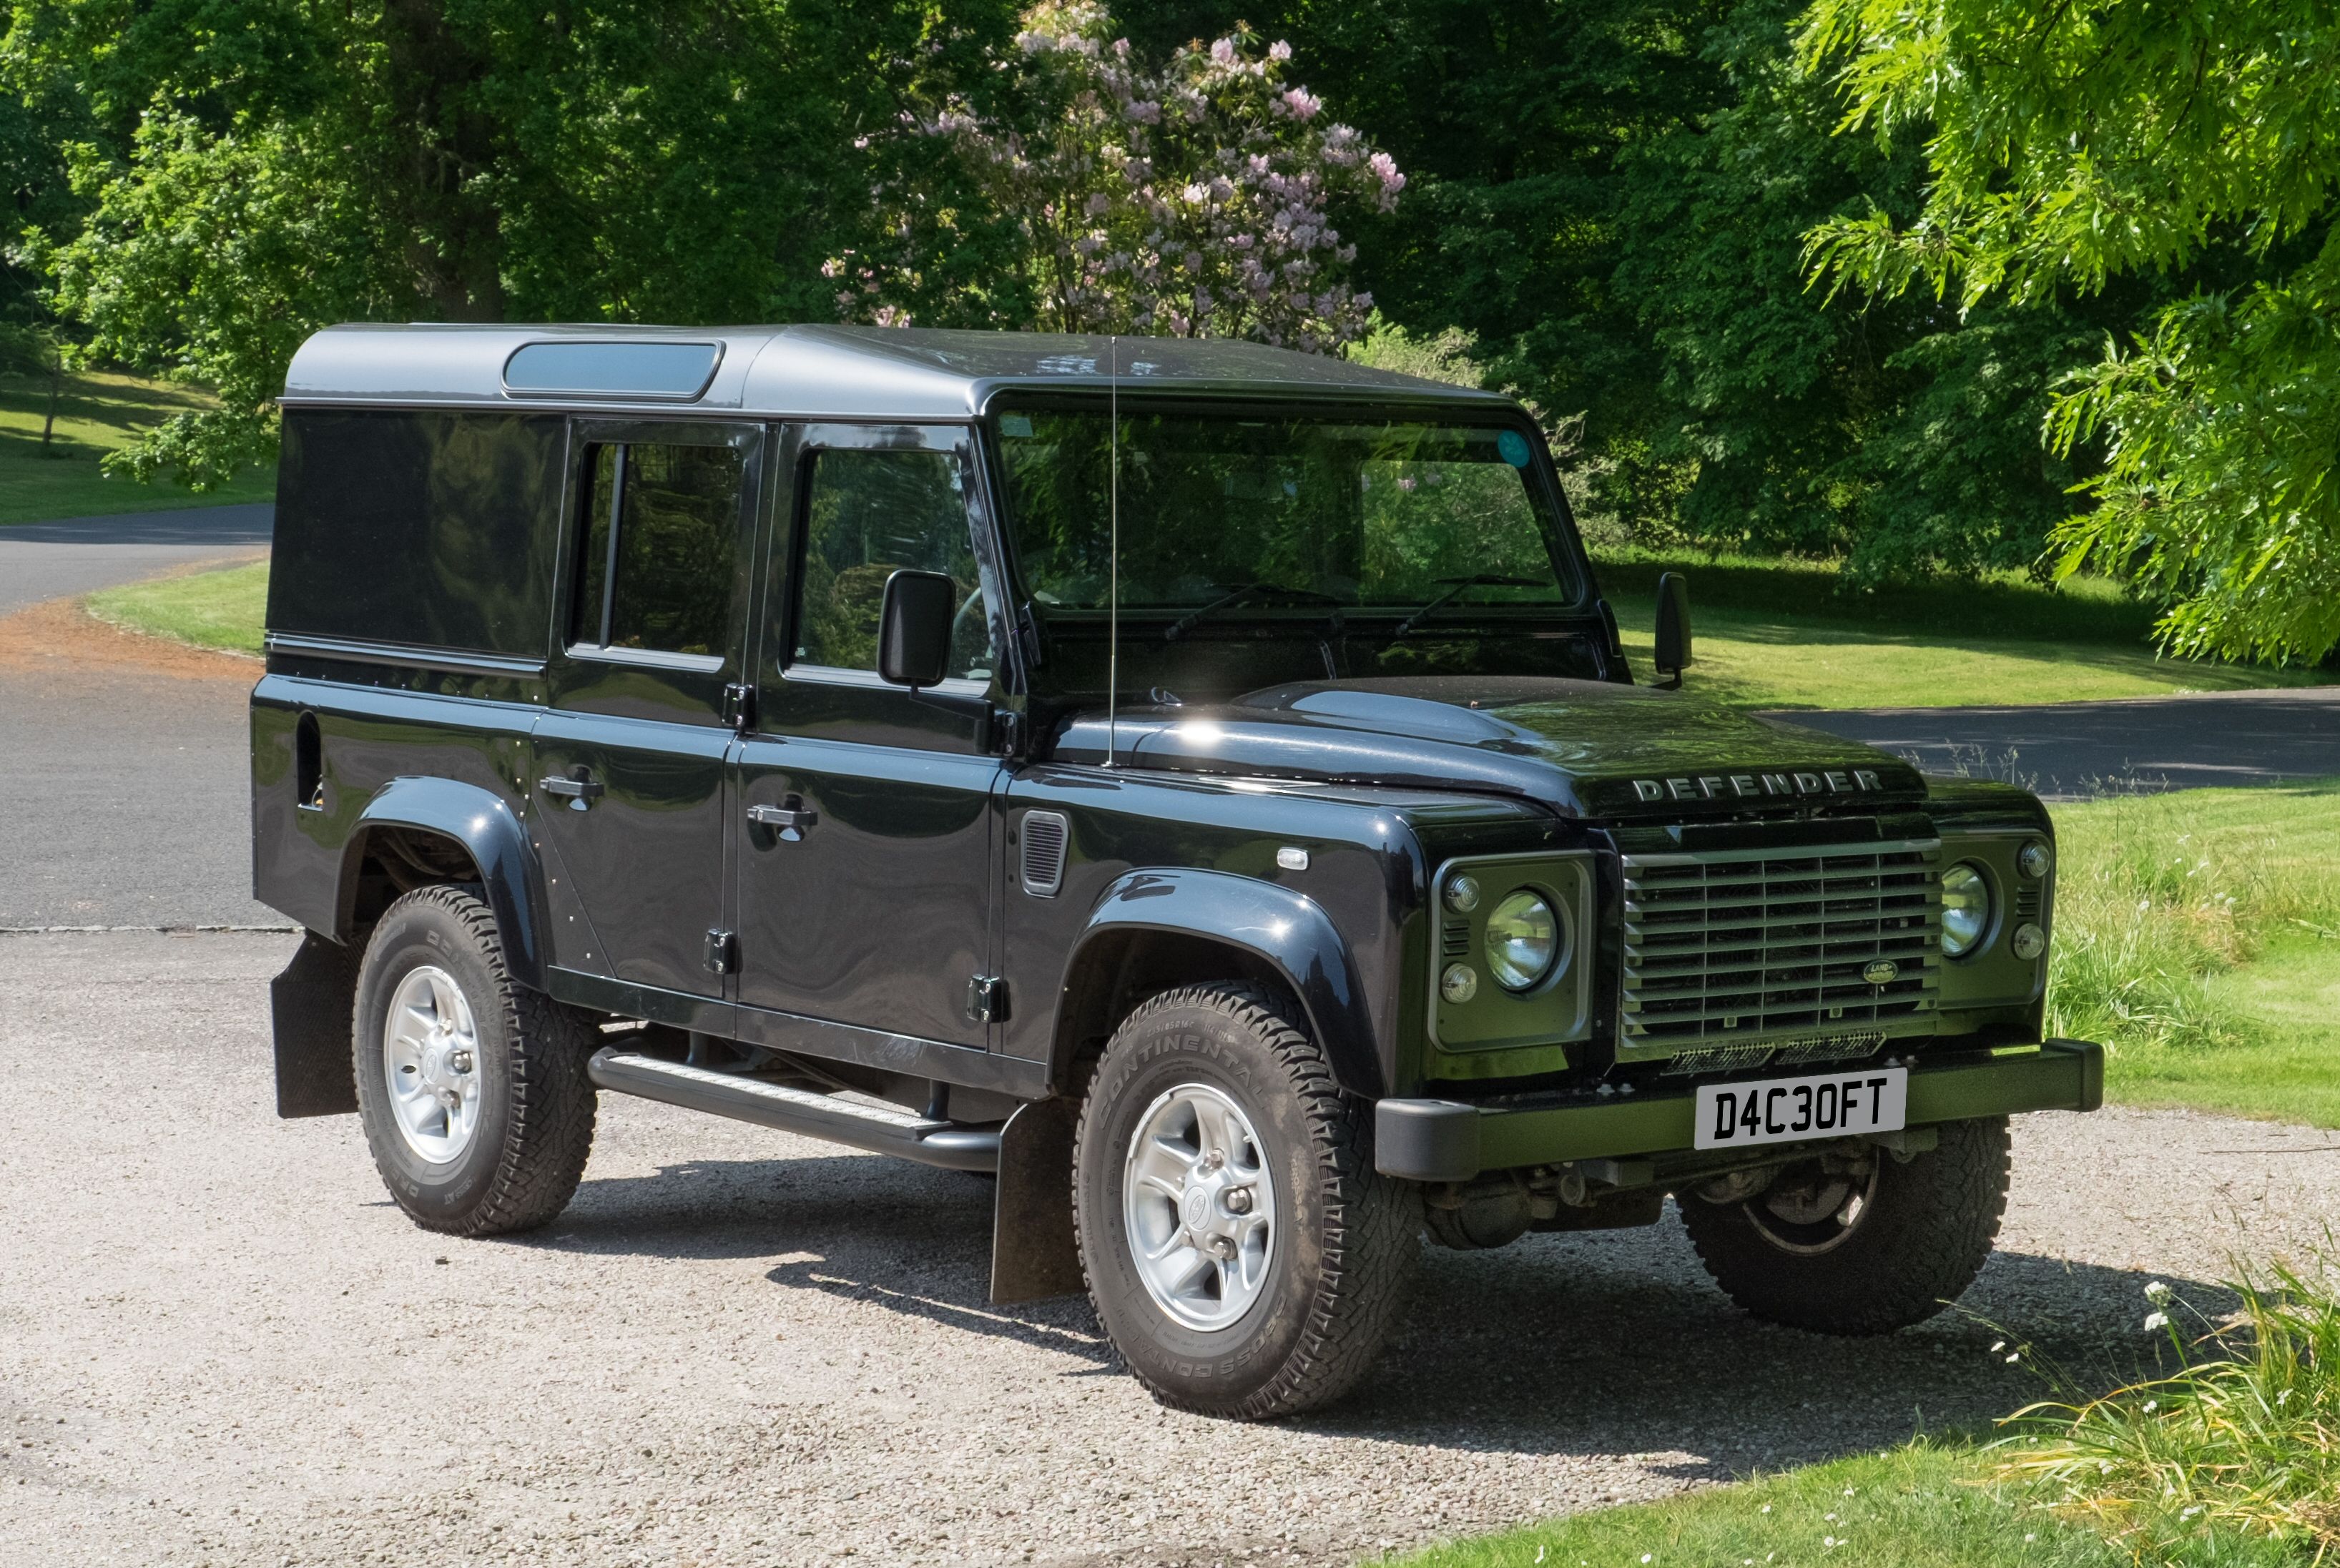 Transplanteren Chinese kool Cirkel Here's The Coolest Features Of The Land Rover Defender